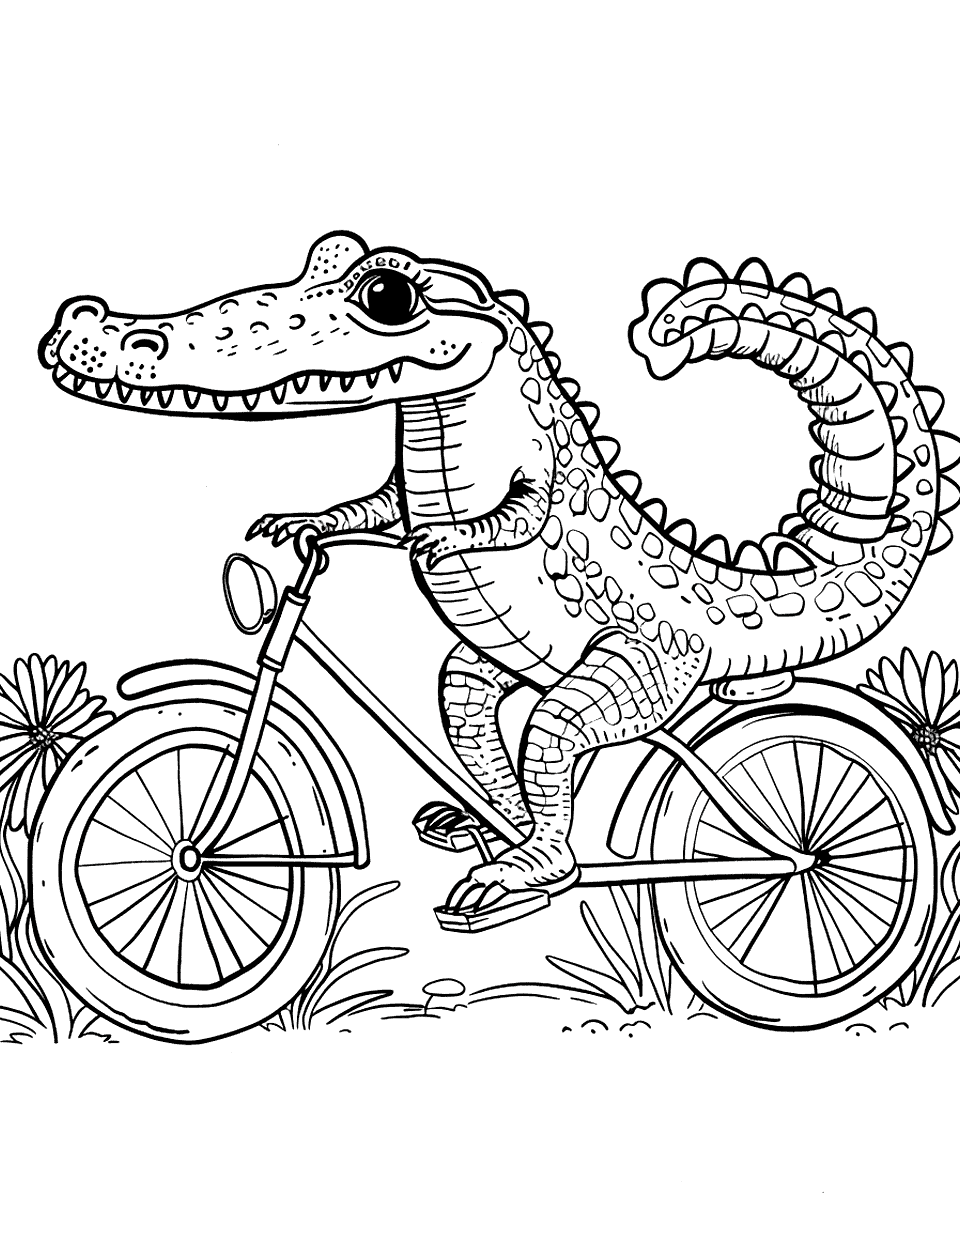 Alligator on a Bicycle Coloring Page - An alligator riding a bicycle down a path with flowers on the sides.